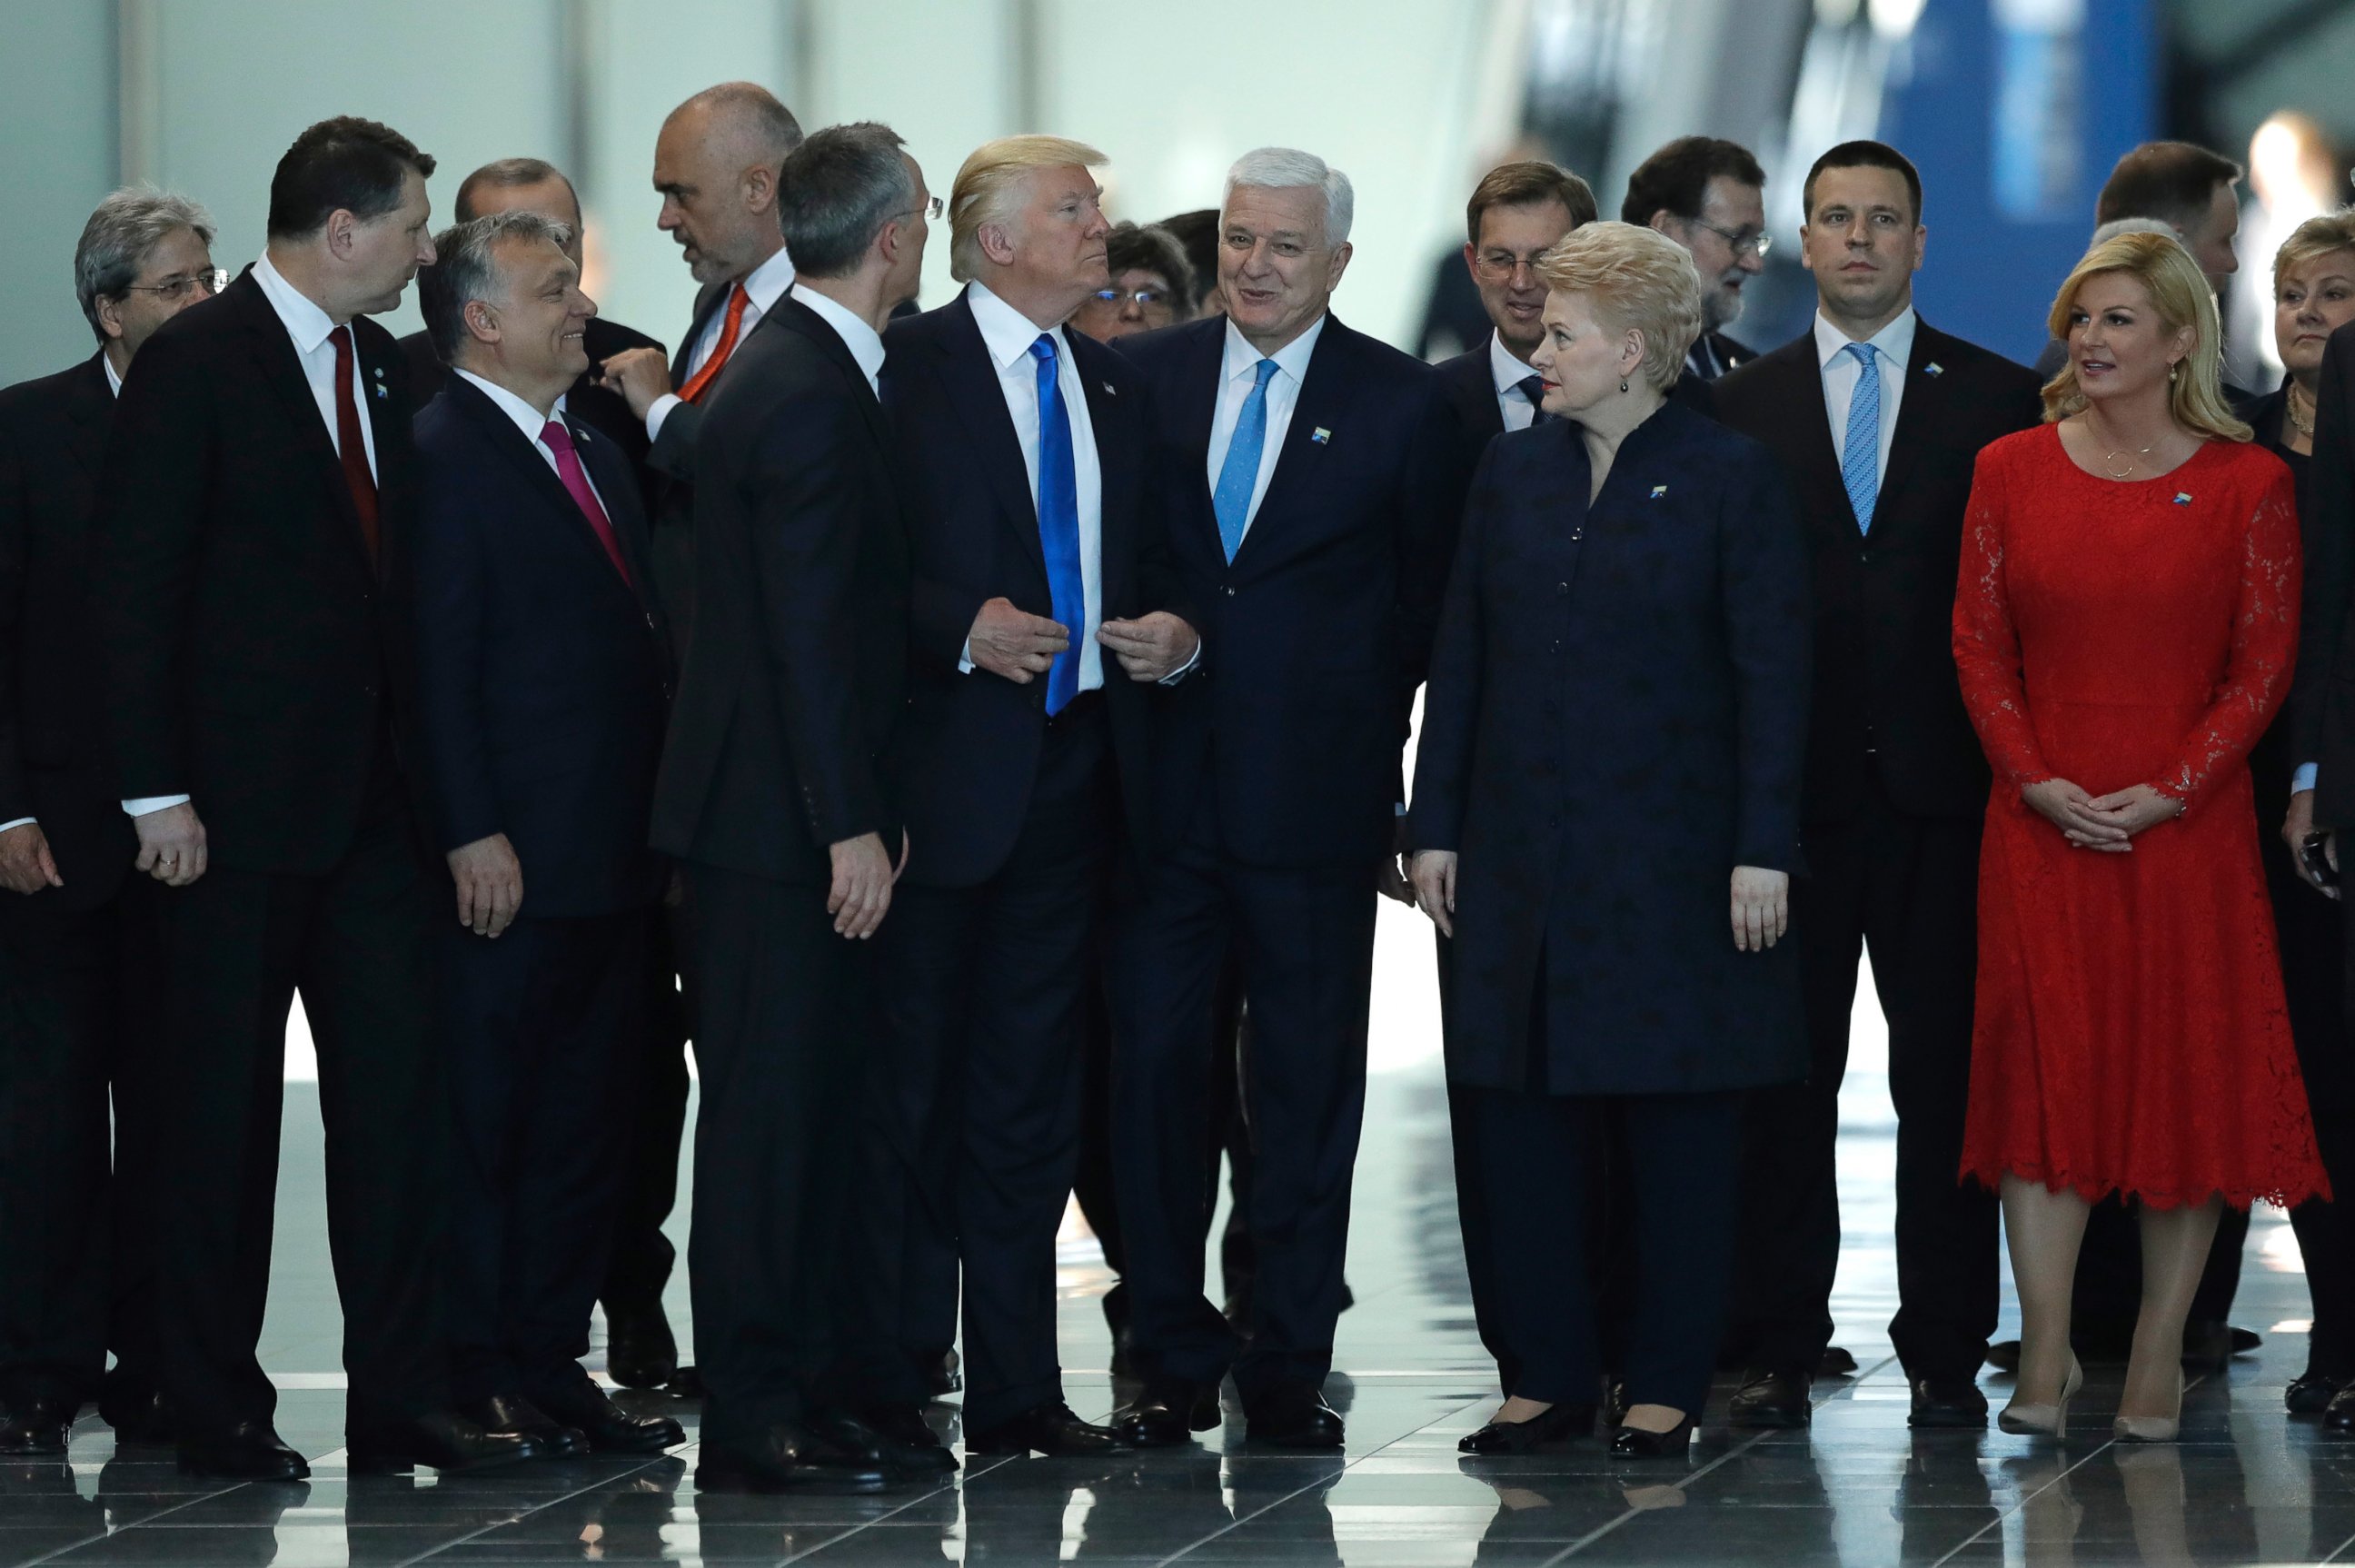 PHOTO: Montenegro Prime Minister Dusko Markovic, center right, smiles after appearing to be pushed by President Donald Trump during a NATO summit of heads of state and government in Brussels on May 25, 2017.